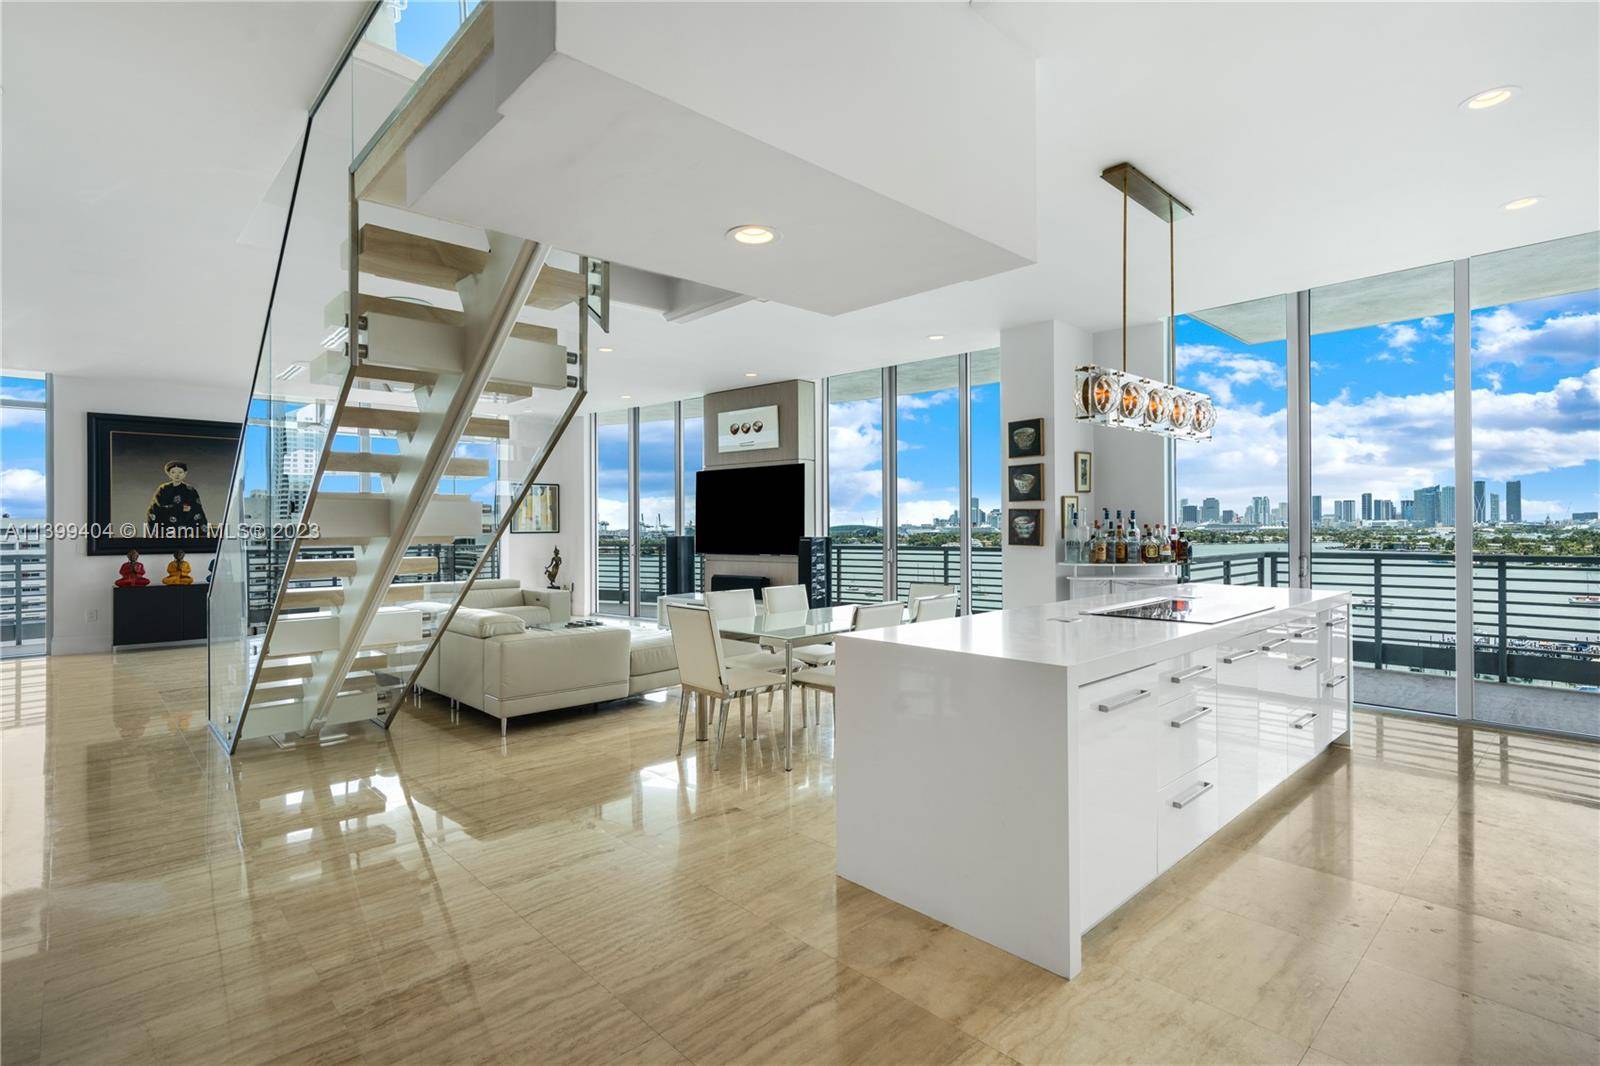 Welcome home to PH1 at Capri South Beach Embrace this rare opportunity to own a corner unit penthouse with sweeping views of the Miami Skyline.